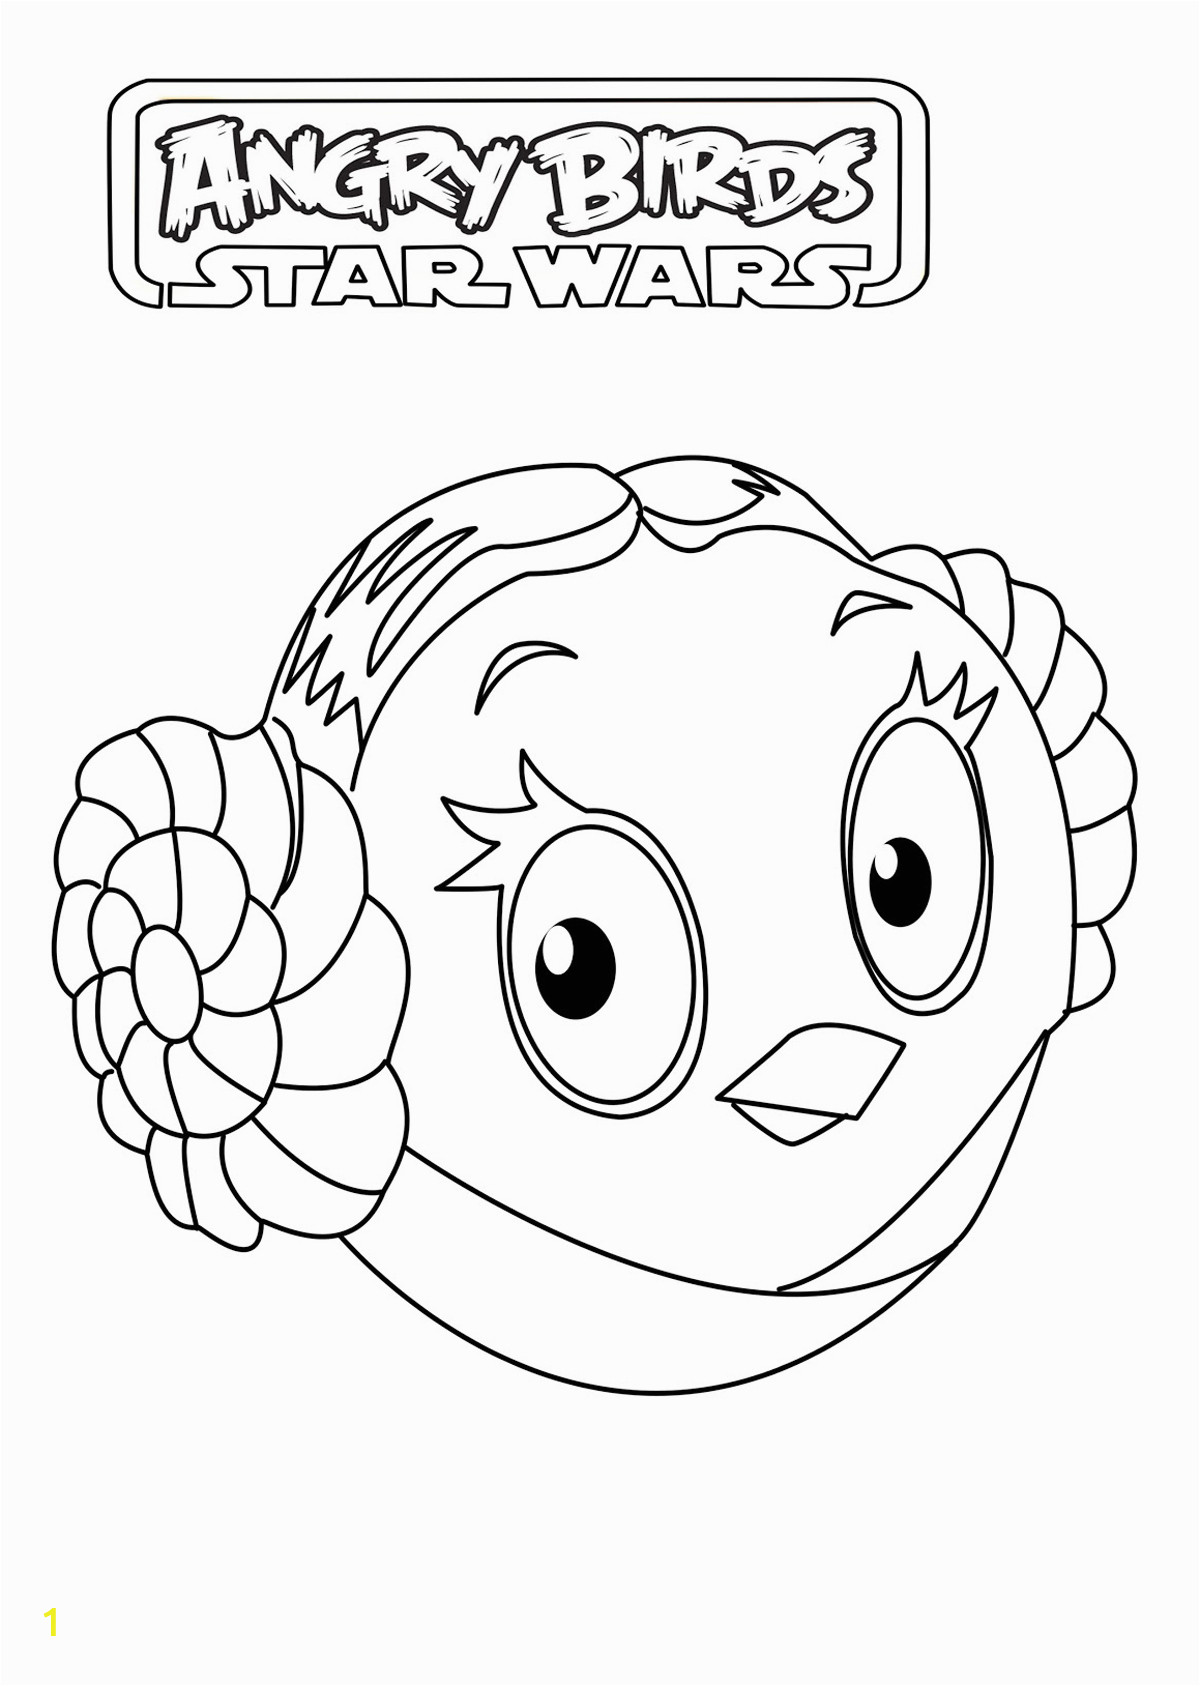 Angry Birds Star Wars Coloring Pages Angry Birds Star Wars Free to Color for Children Angry